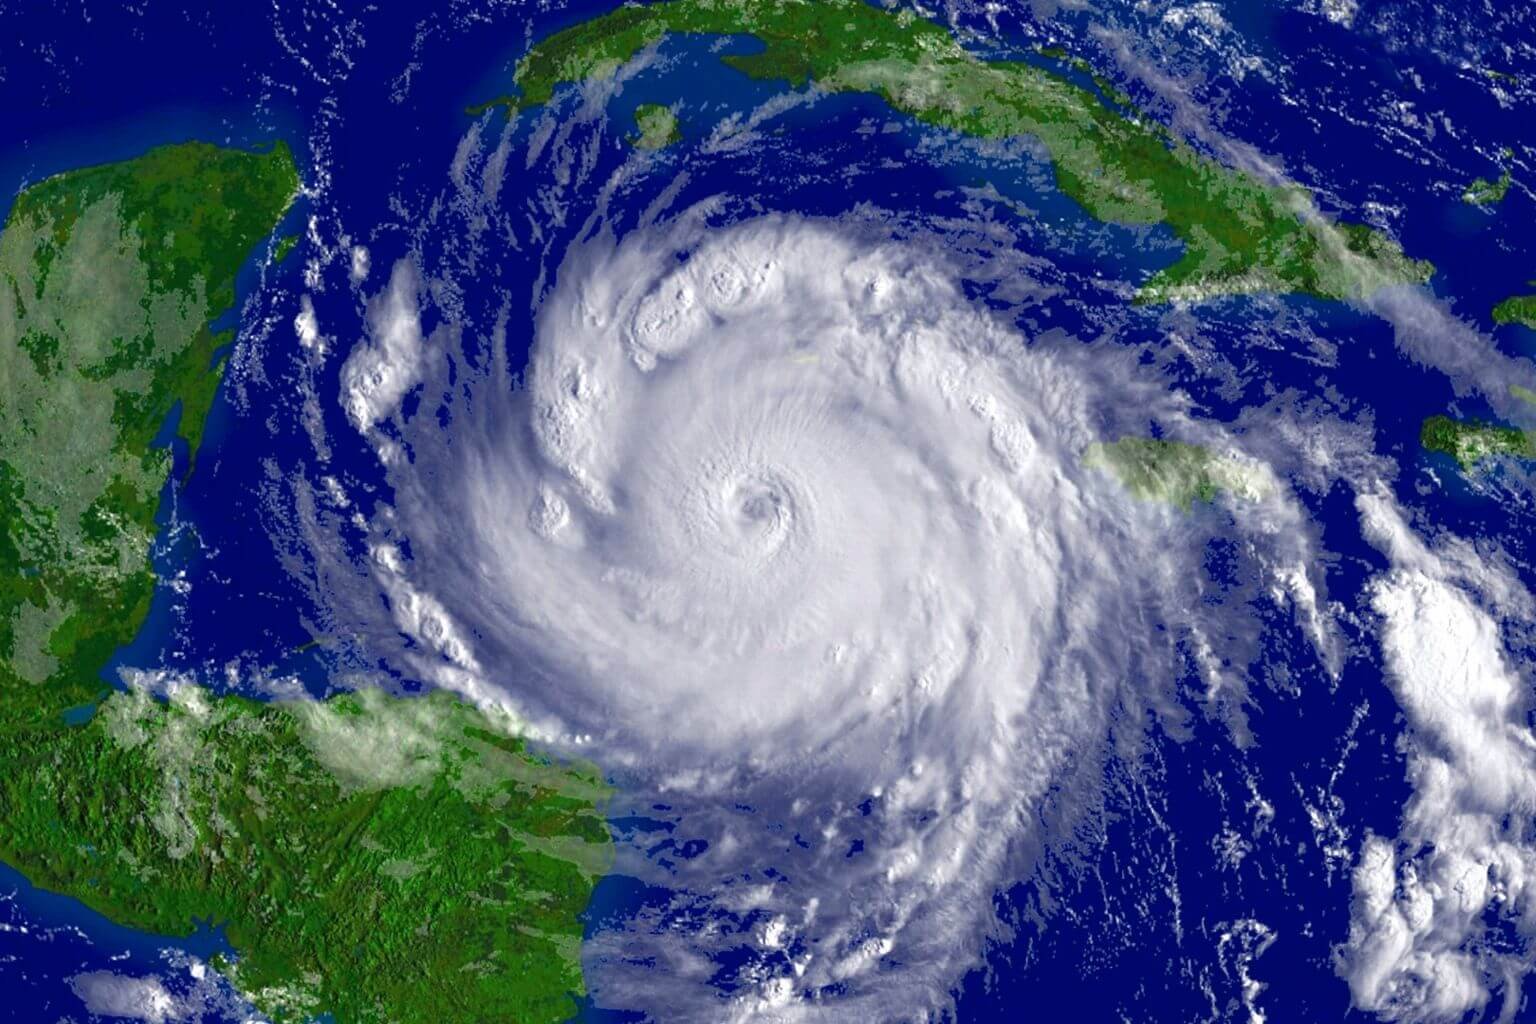 Areal view of a large hurricane approaching the Yucatan from the Caribbean